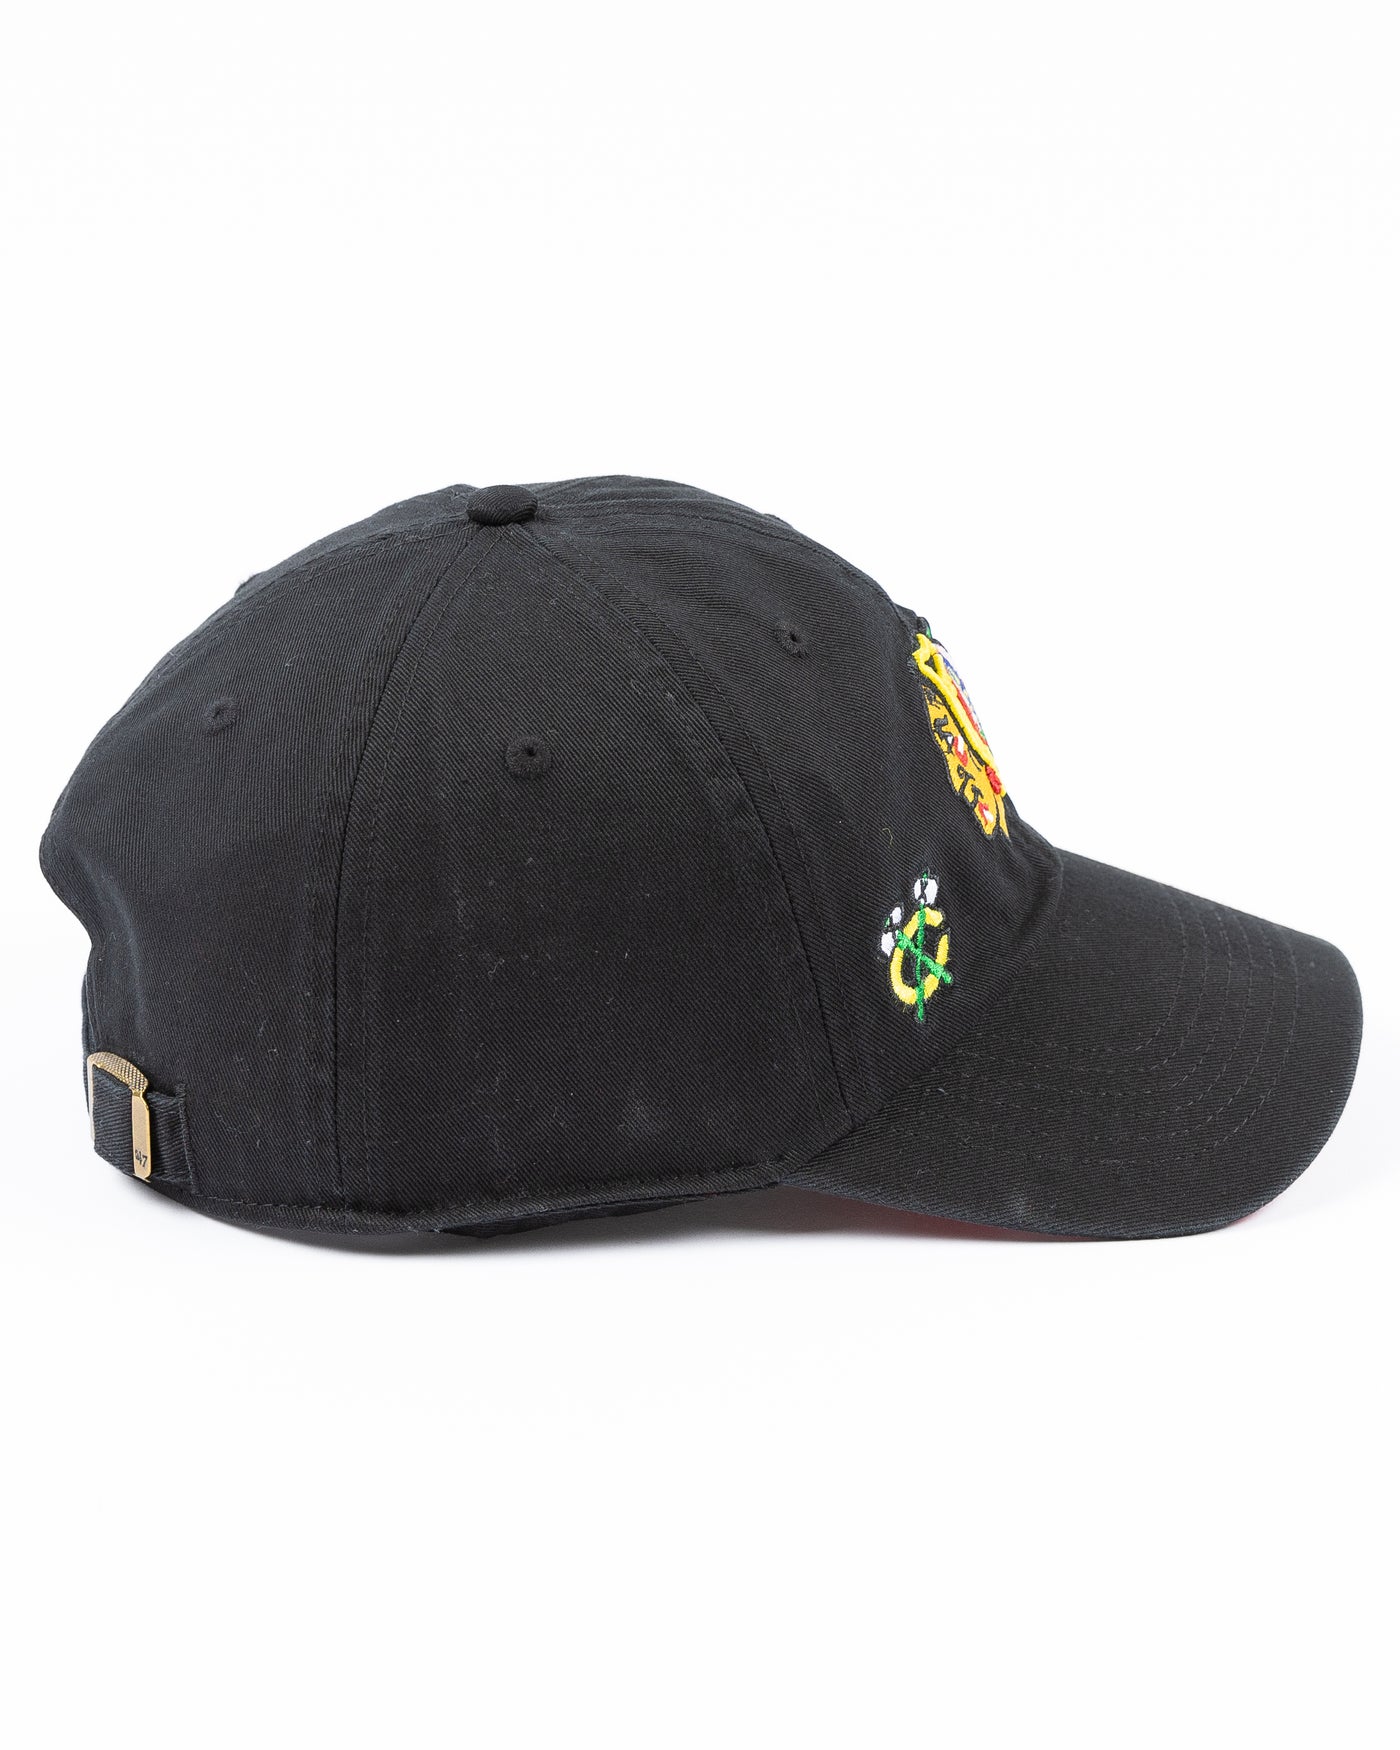 black ladies '47 brand clean up cap with Chicago Blackhawks primary and secondary logos embroidered on the front - right side lay flat